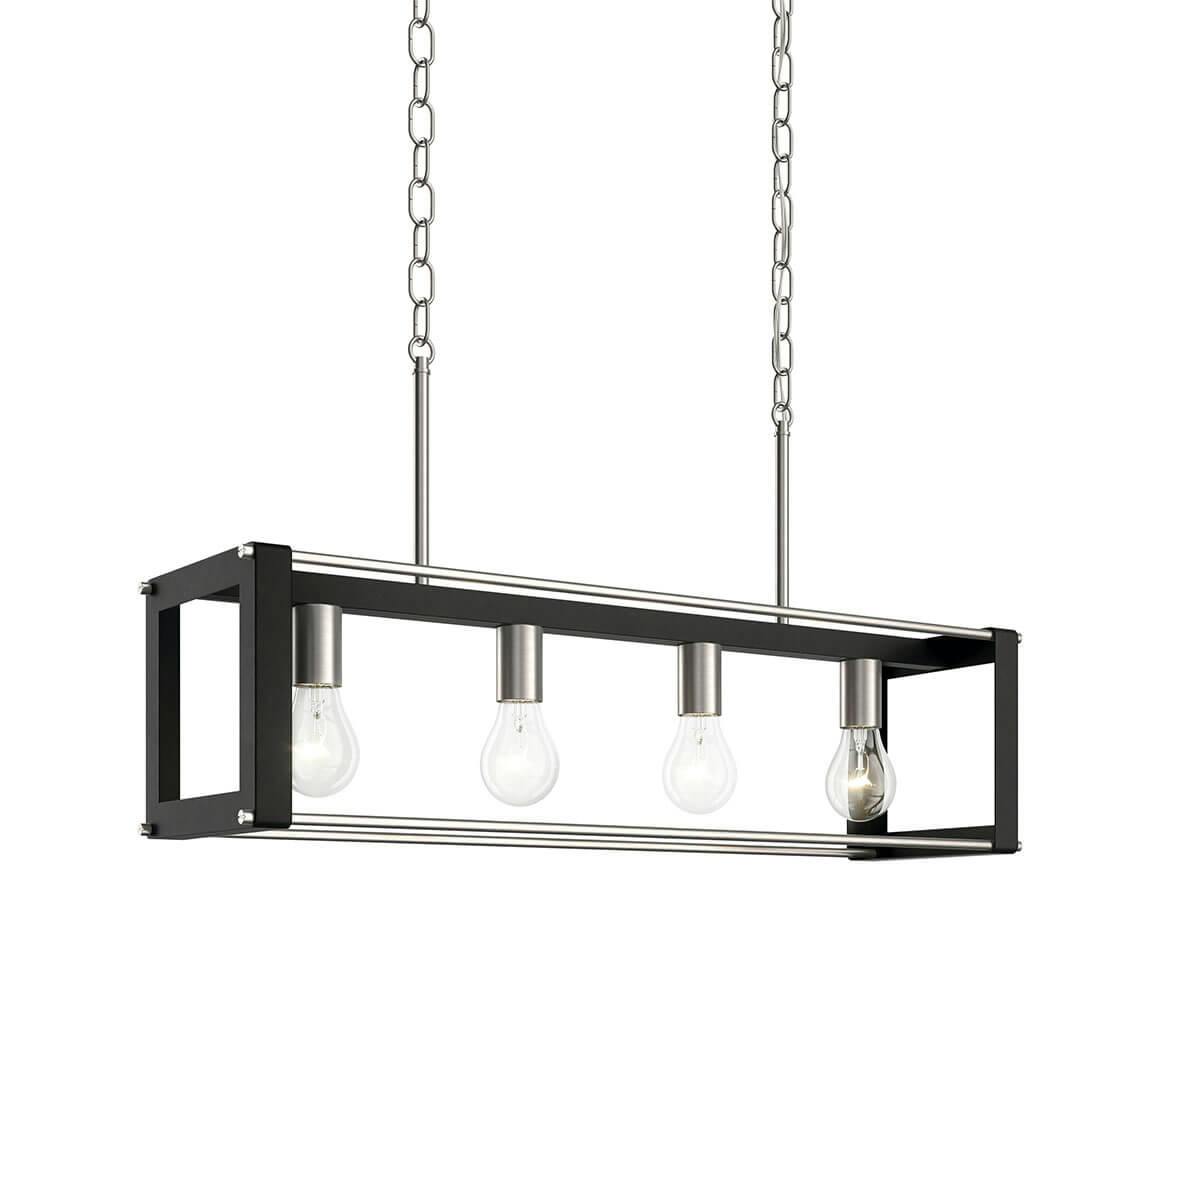 Chatwin 30.6" Nickel Linear Chandelier without the canopy on a white background